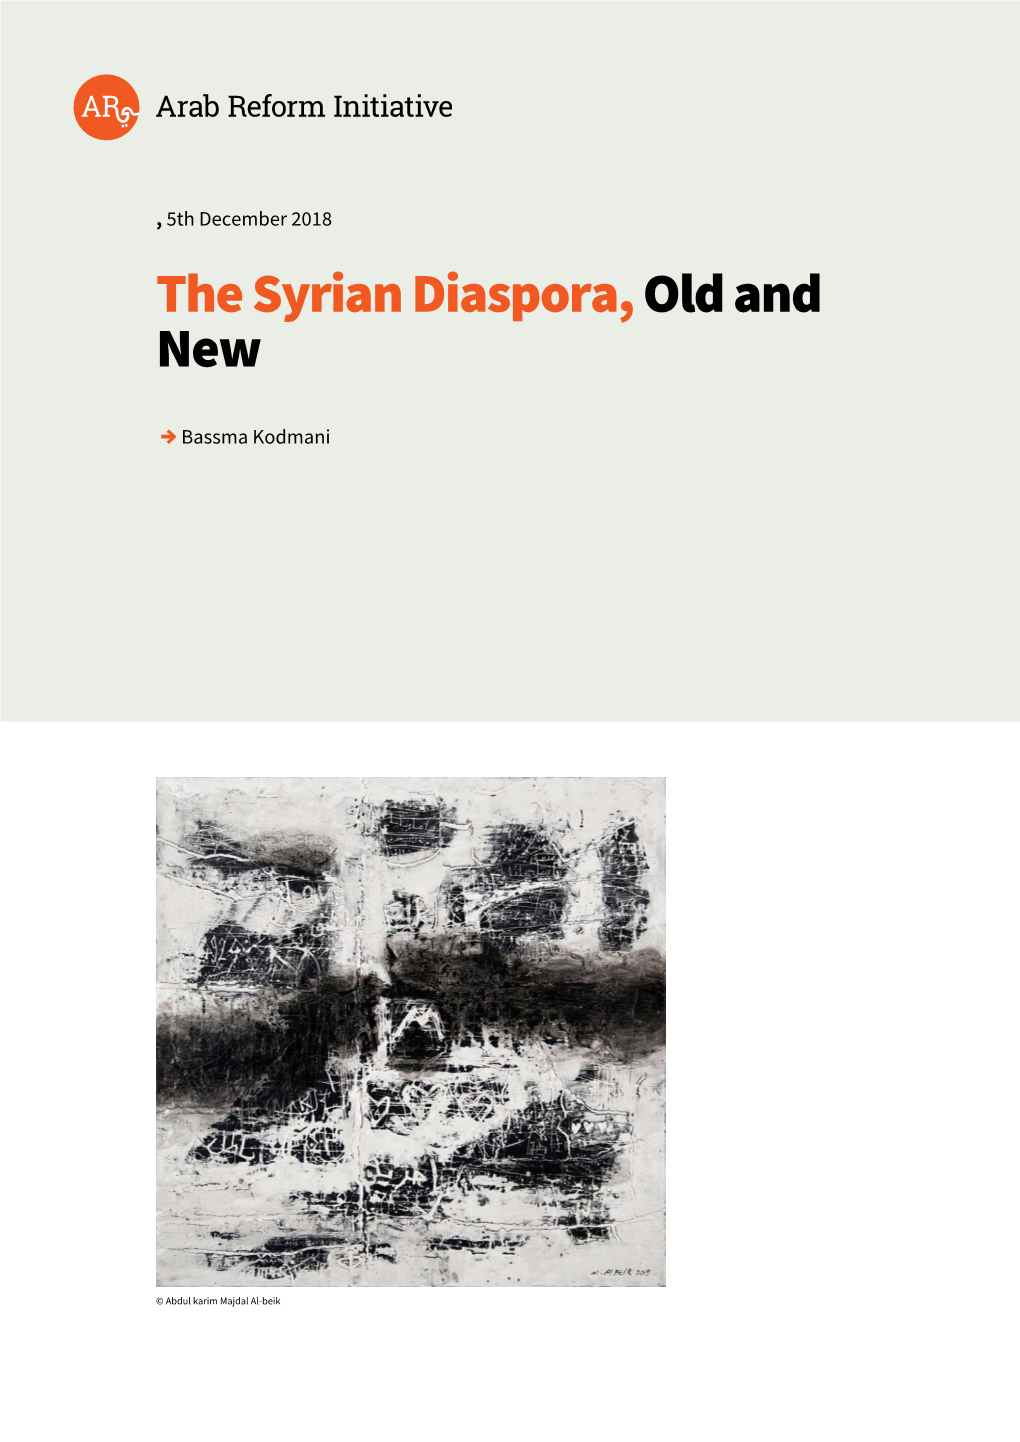 The Syrian Diaspora, Old and New